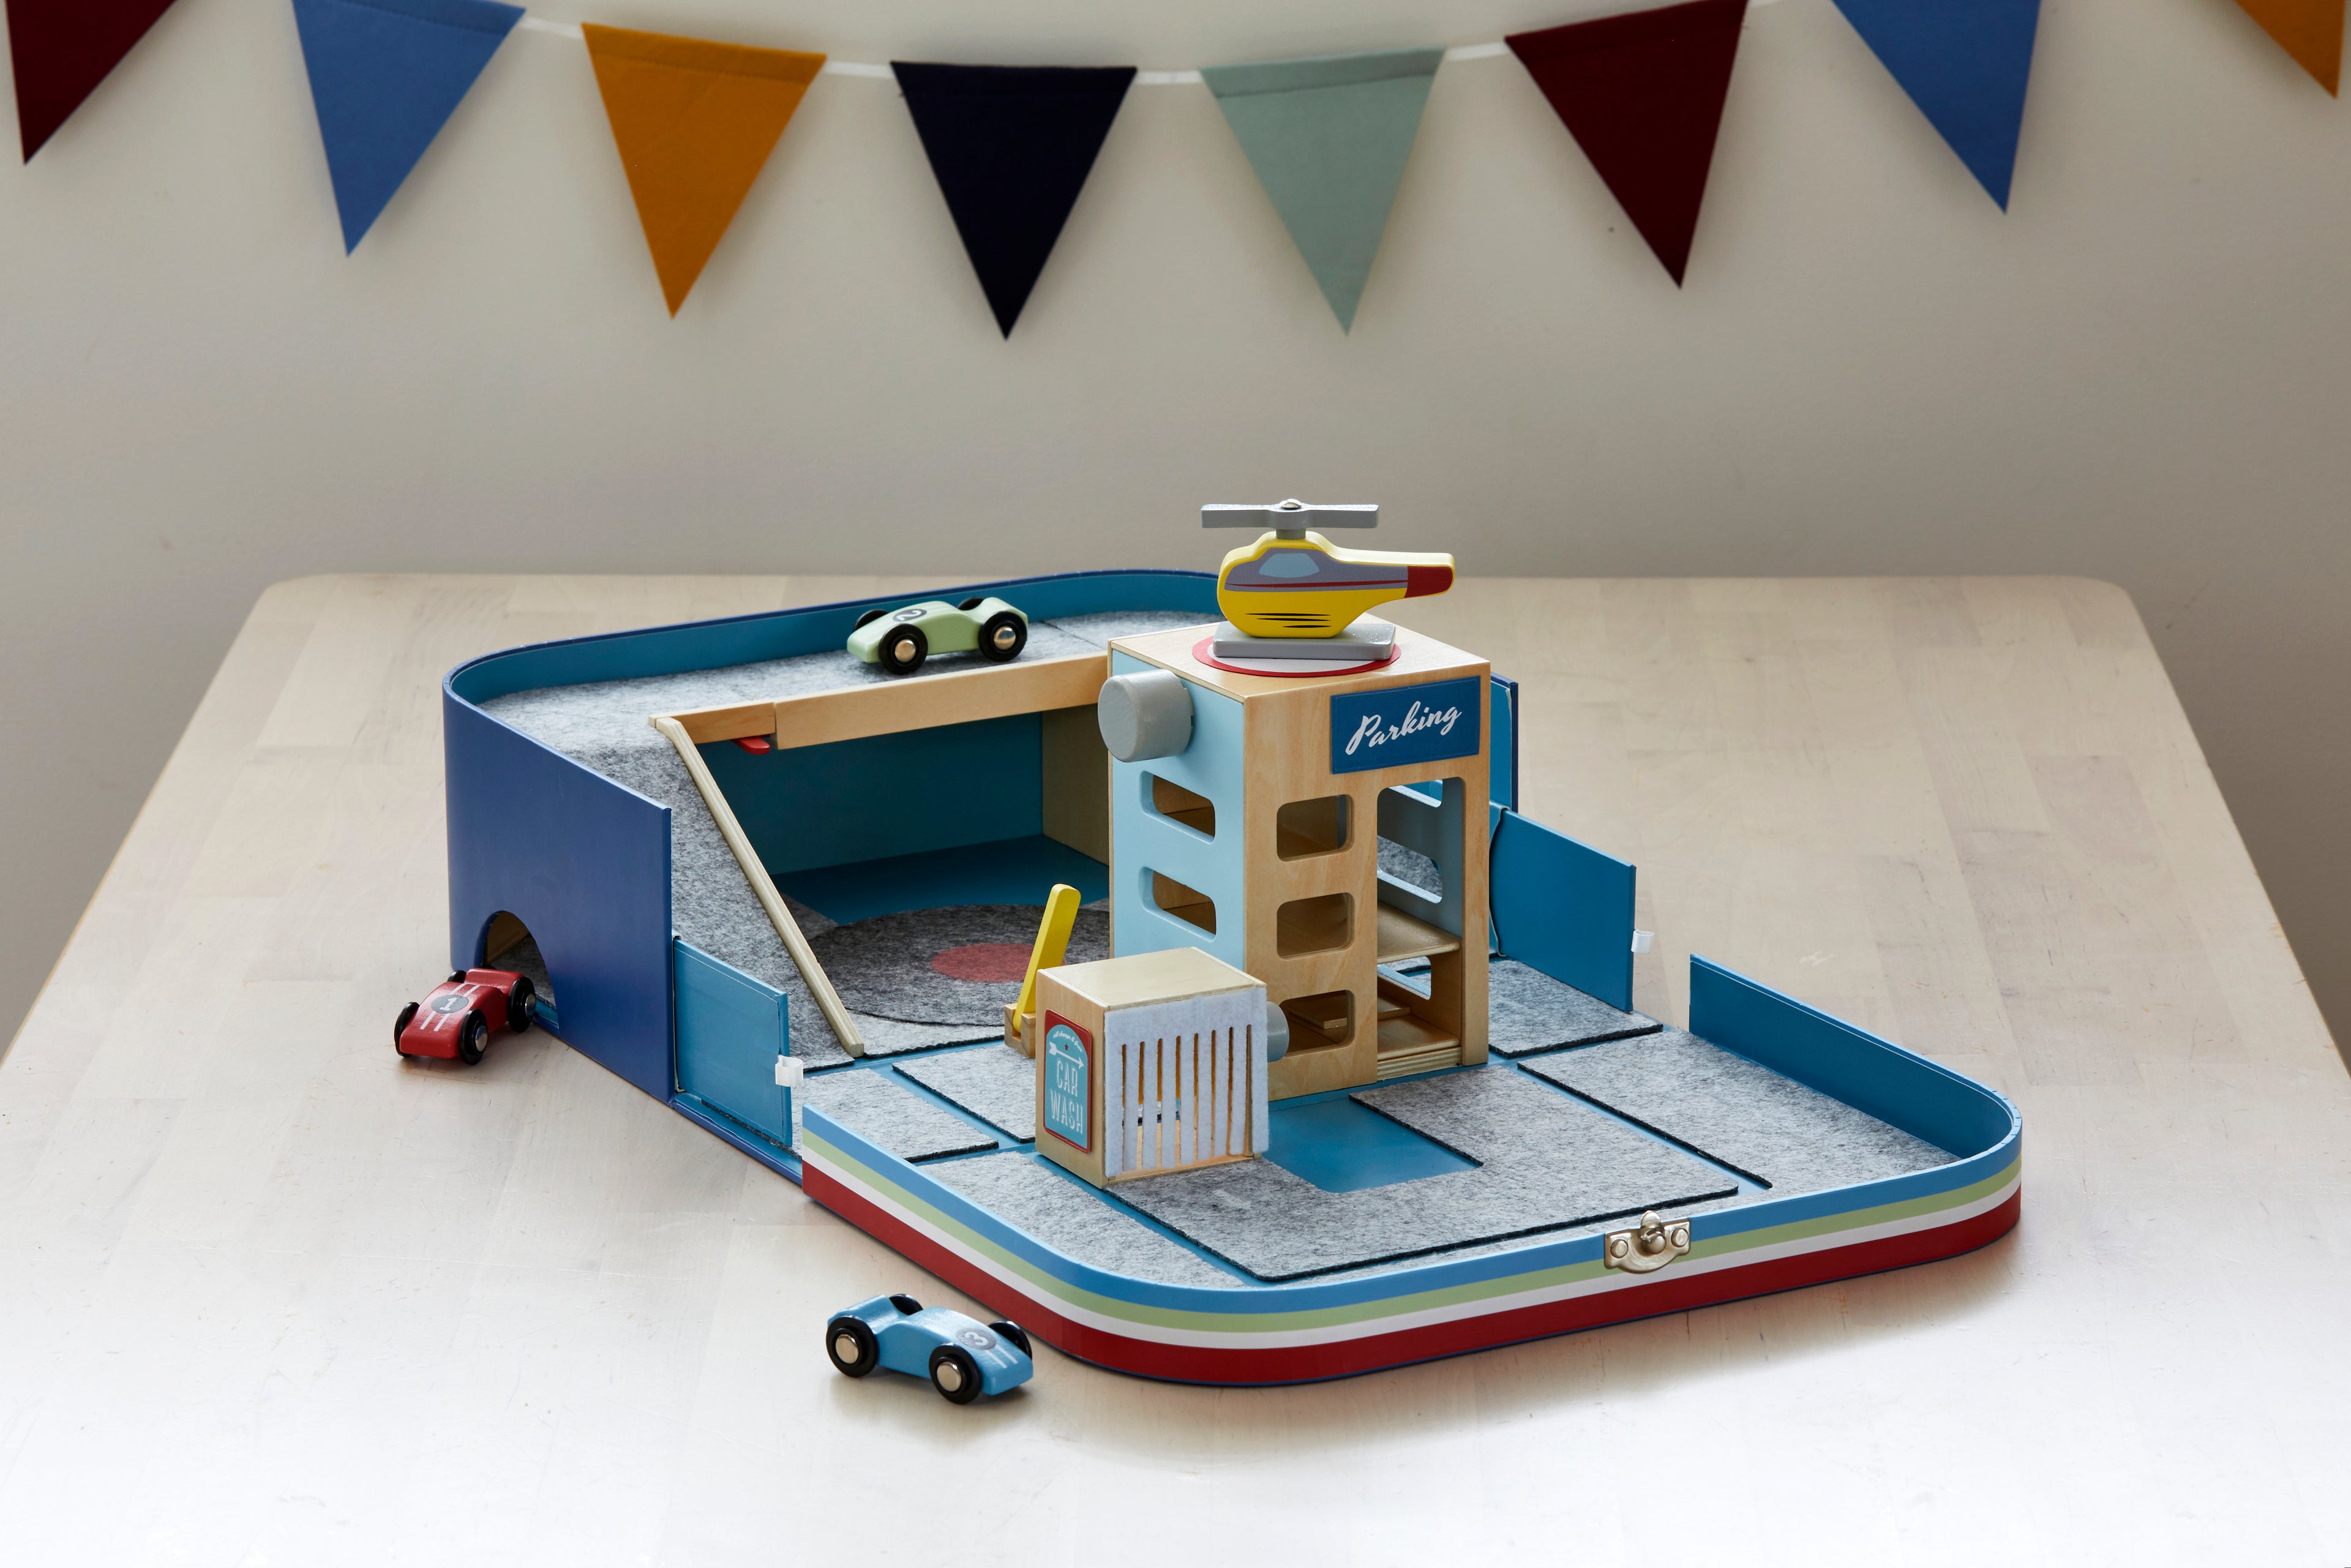 Load video: Children&#39;s educational car lover toy suitcase including two cars, helicopter, parking garage, car wash, bridges and tunnels. Supports children development. Sustainable and recycled materials (Fsc timber, recycled felt). Original, educational and ethically produced. Supporting cognitive, fine motor, problem solving skills &amp; imaginative play. Easy to pack and carry around. Suitable for 3+ years. Designed and prototyped in Australia. Environmentally friendly packaging.